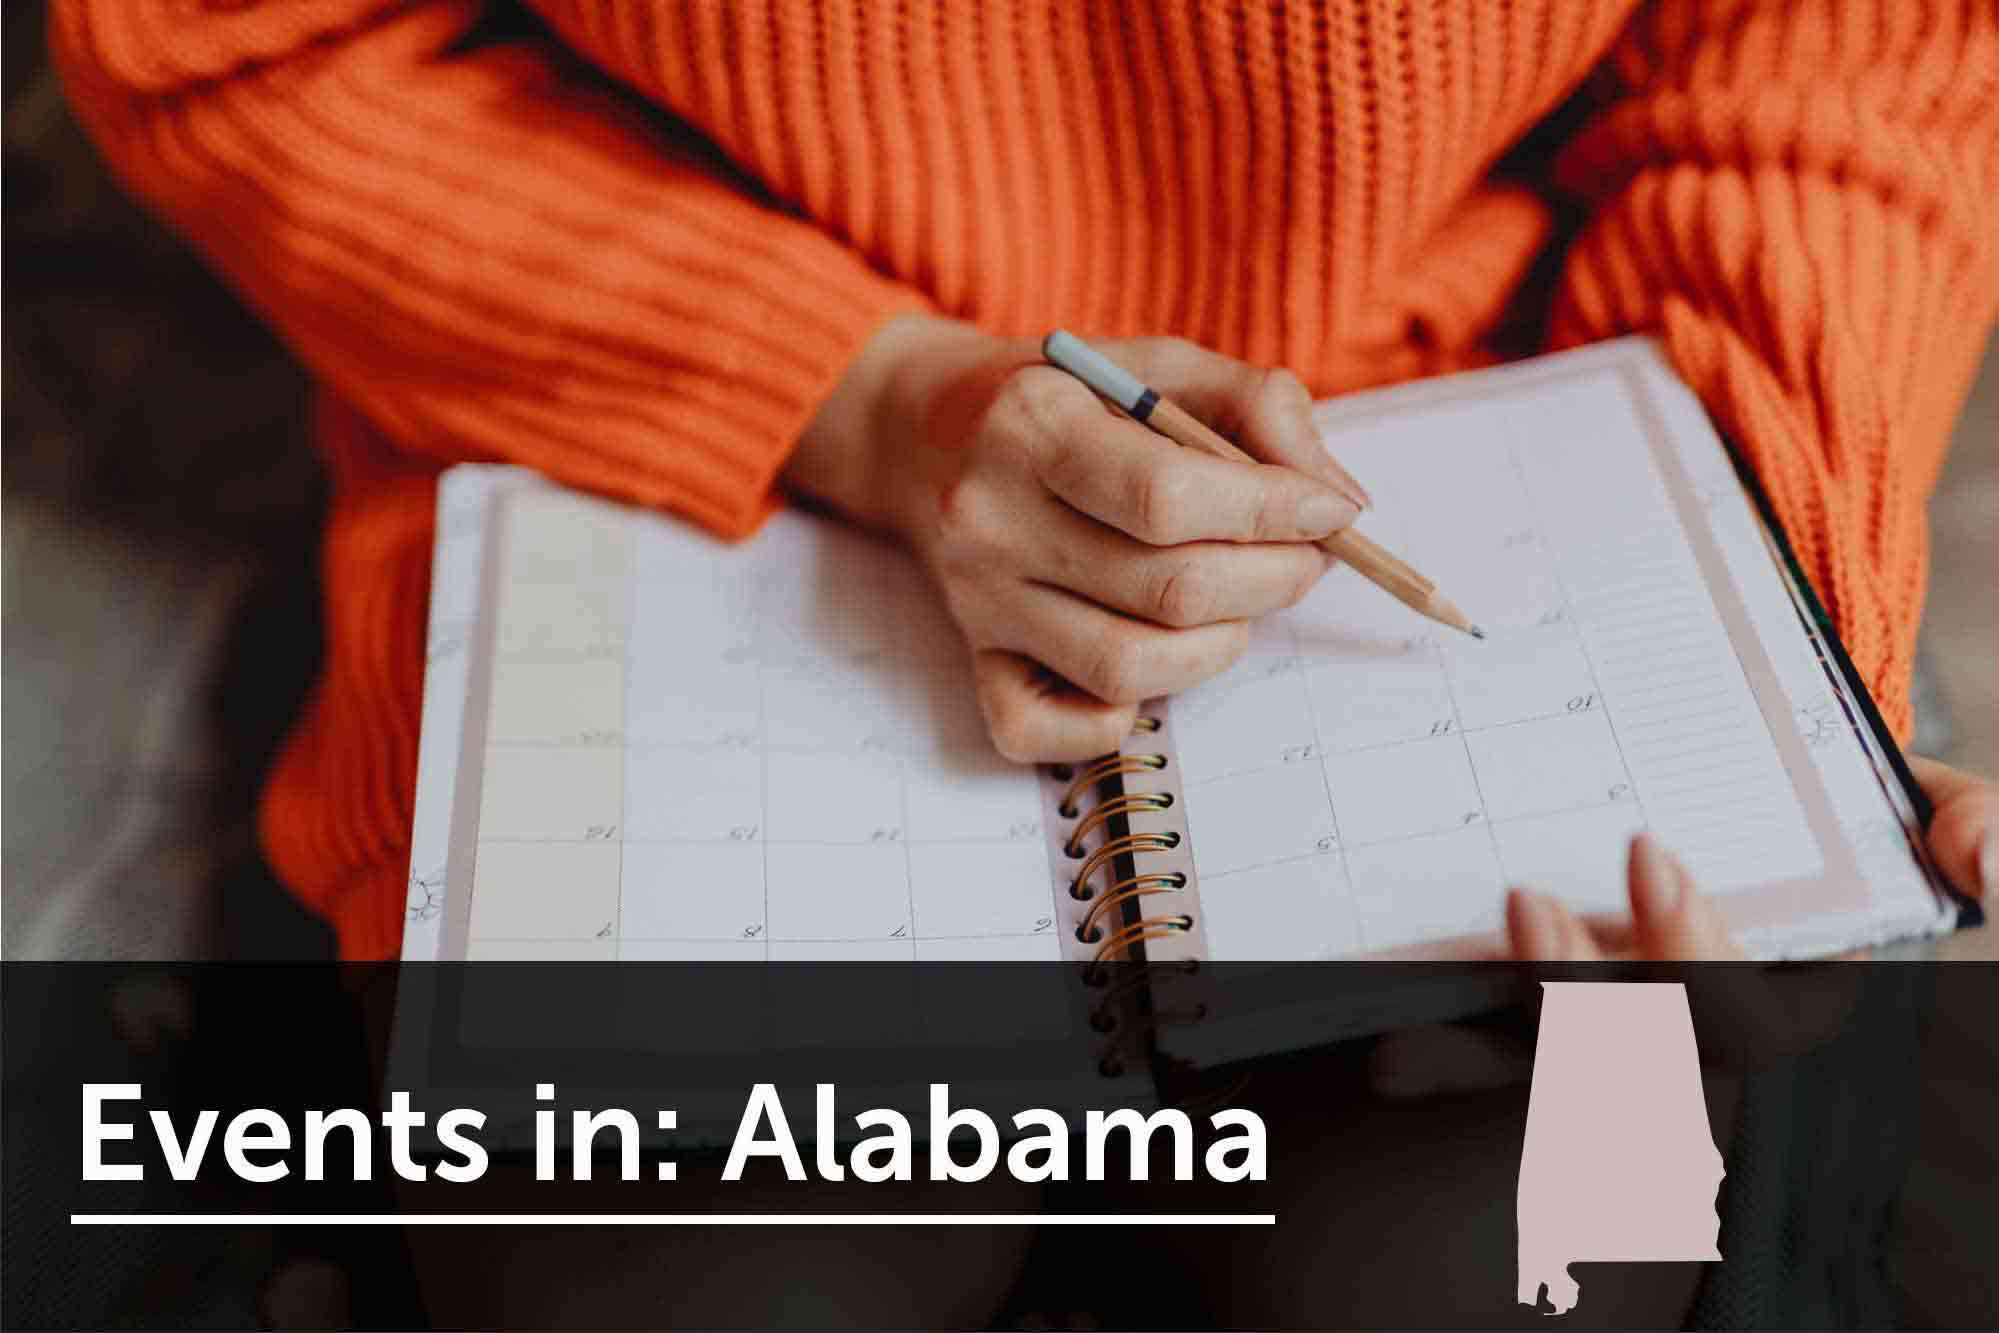 Women's business events in Alabama